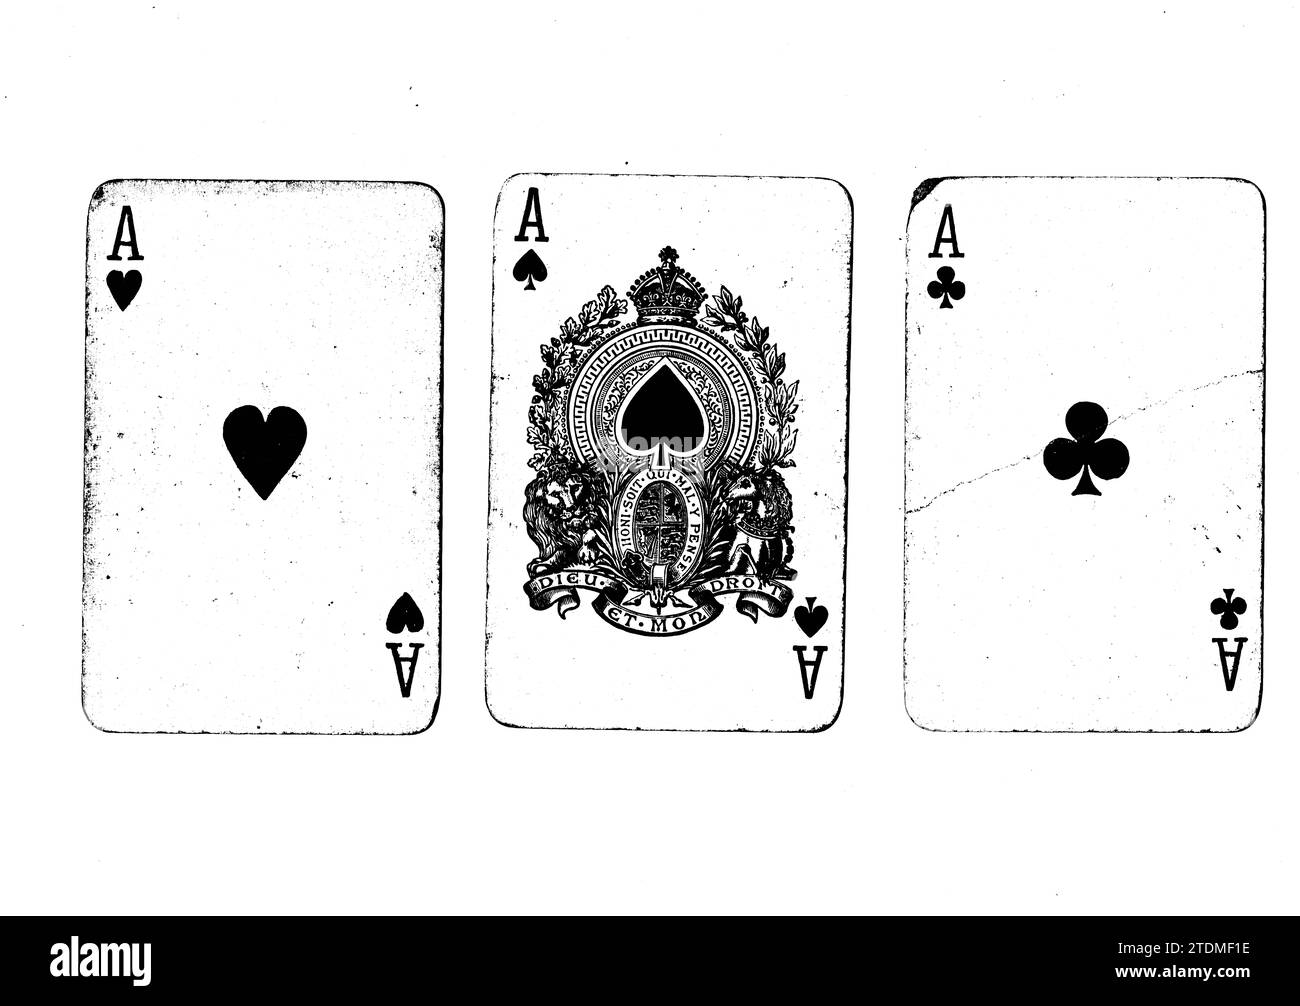 Vintage Playing Cards In Black And White Showing Three Aces Isolated On A White Background Stock